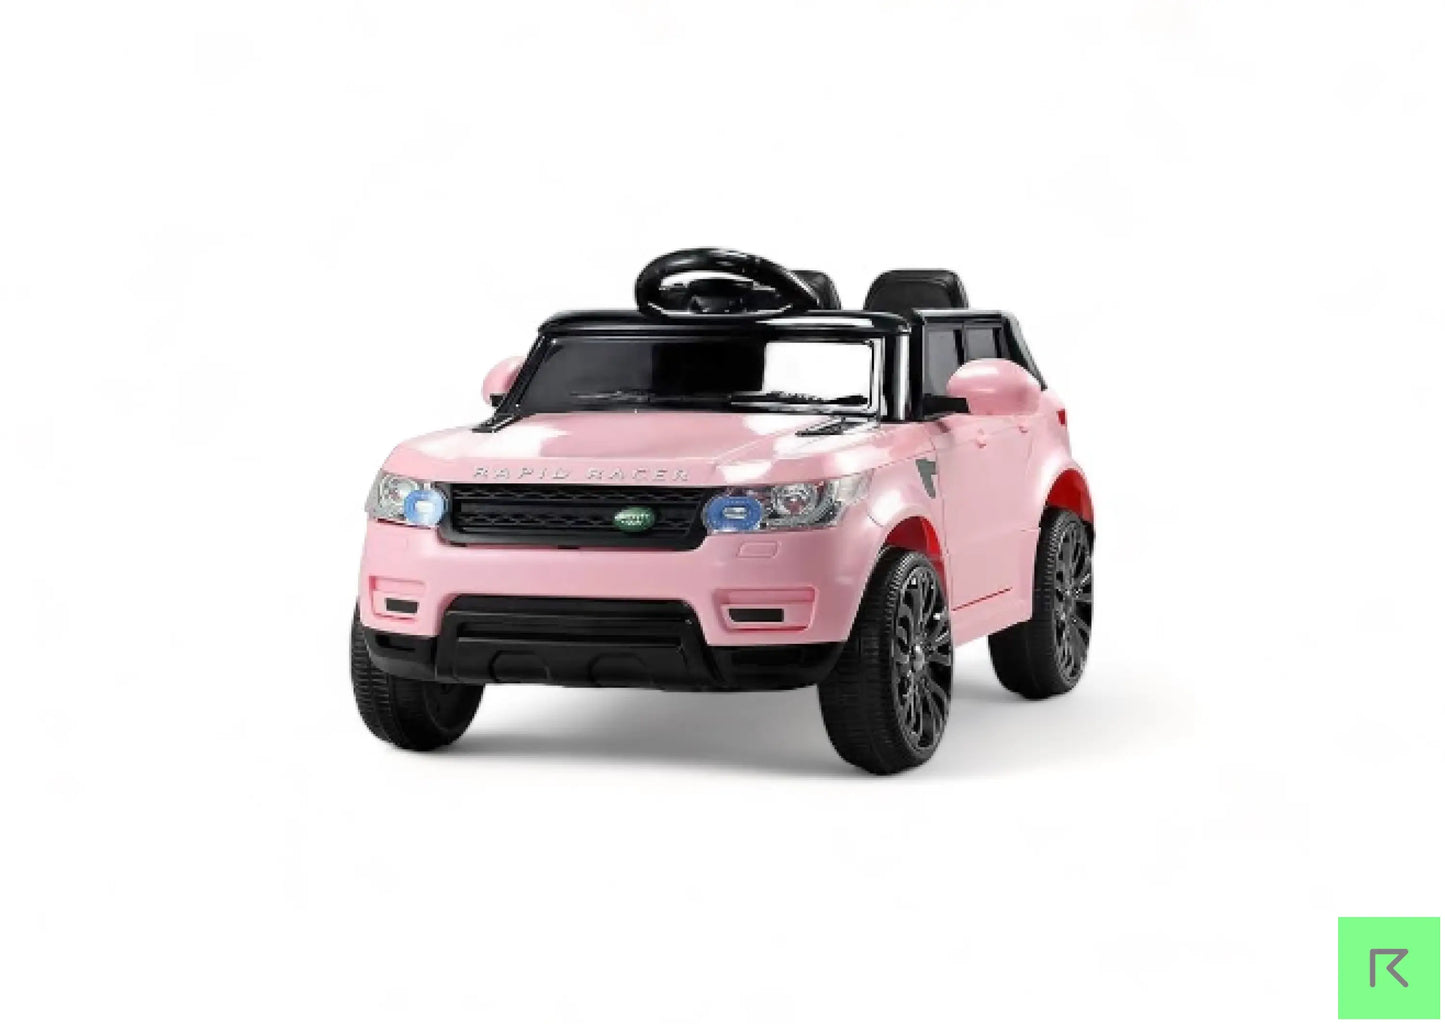 Range Rover Kids Pink Electric Ride On Car - KIDS RIDE ON ELECTRIC CAR